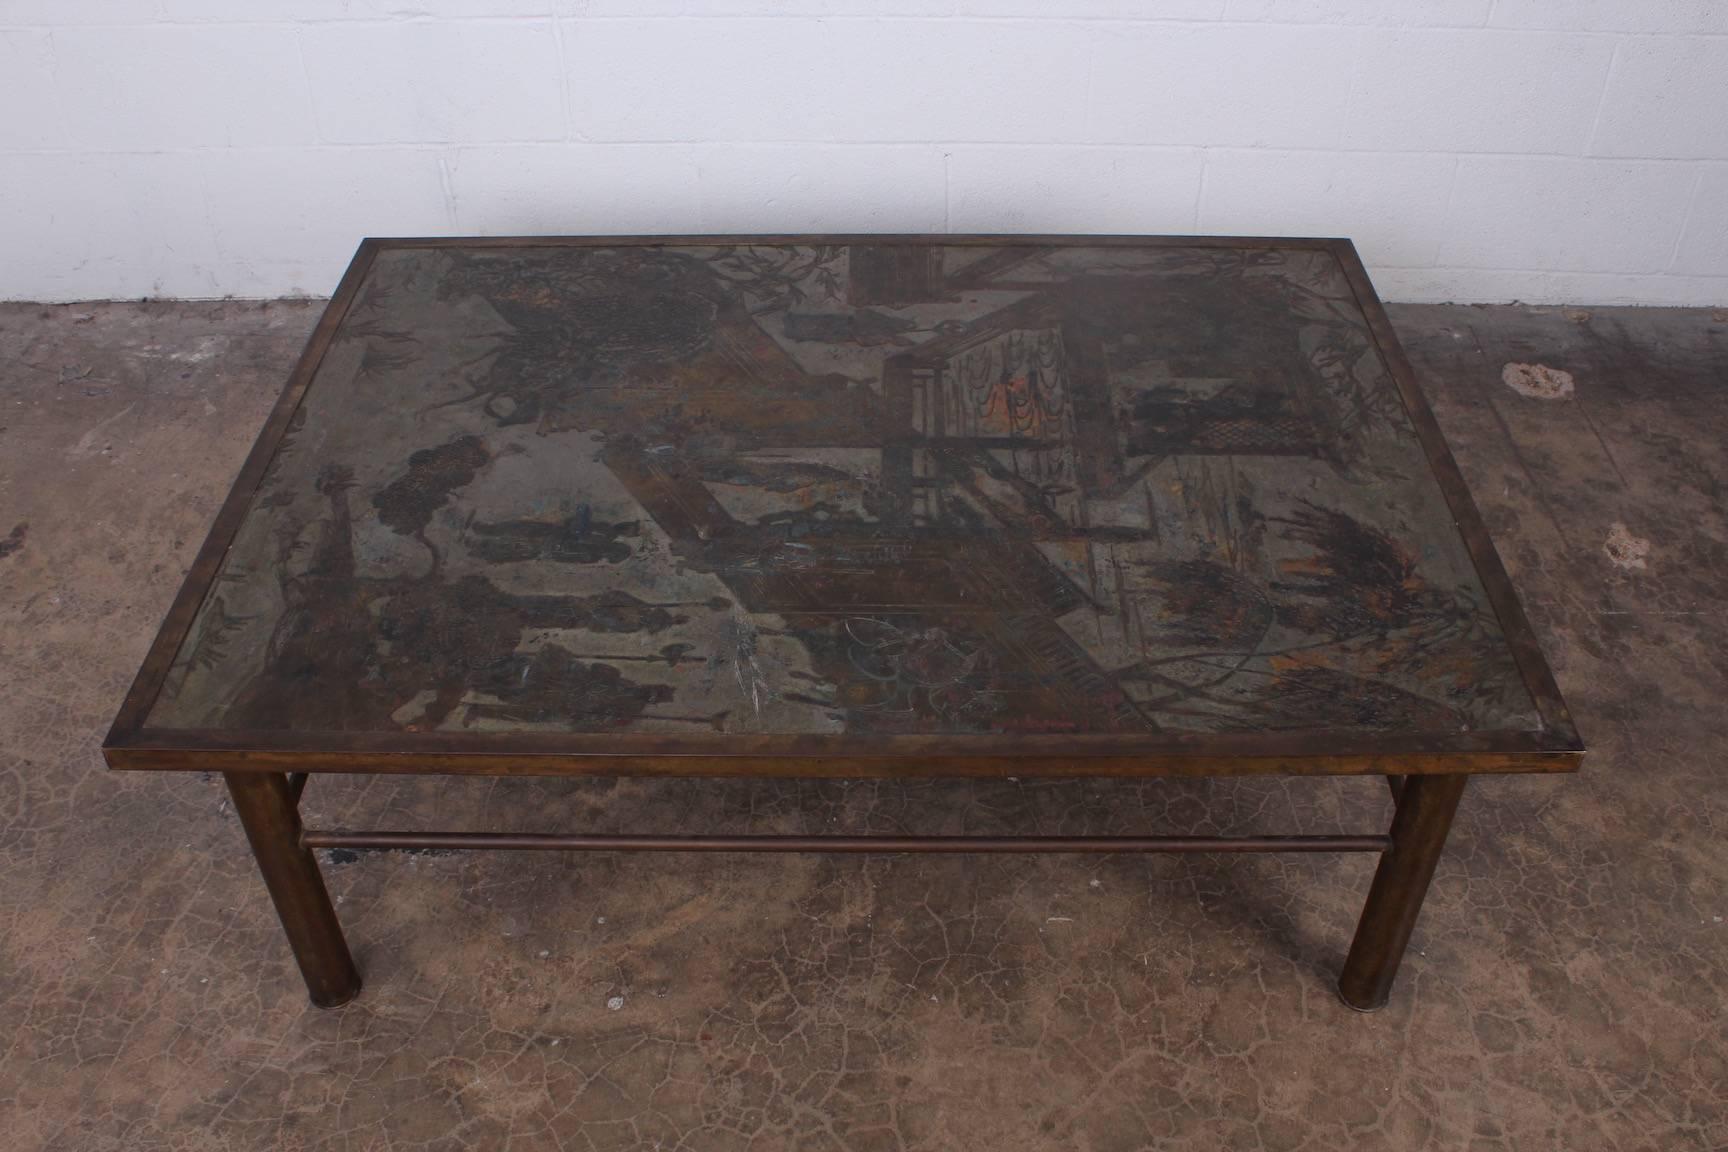 A bronze Chan coffee table designed by Philip and Kelvin LaVerne.